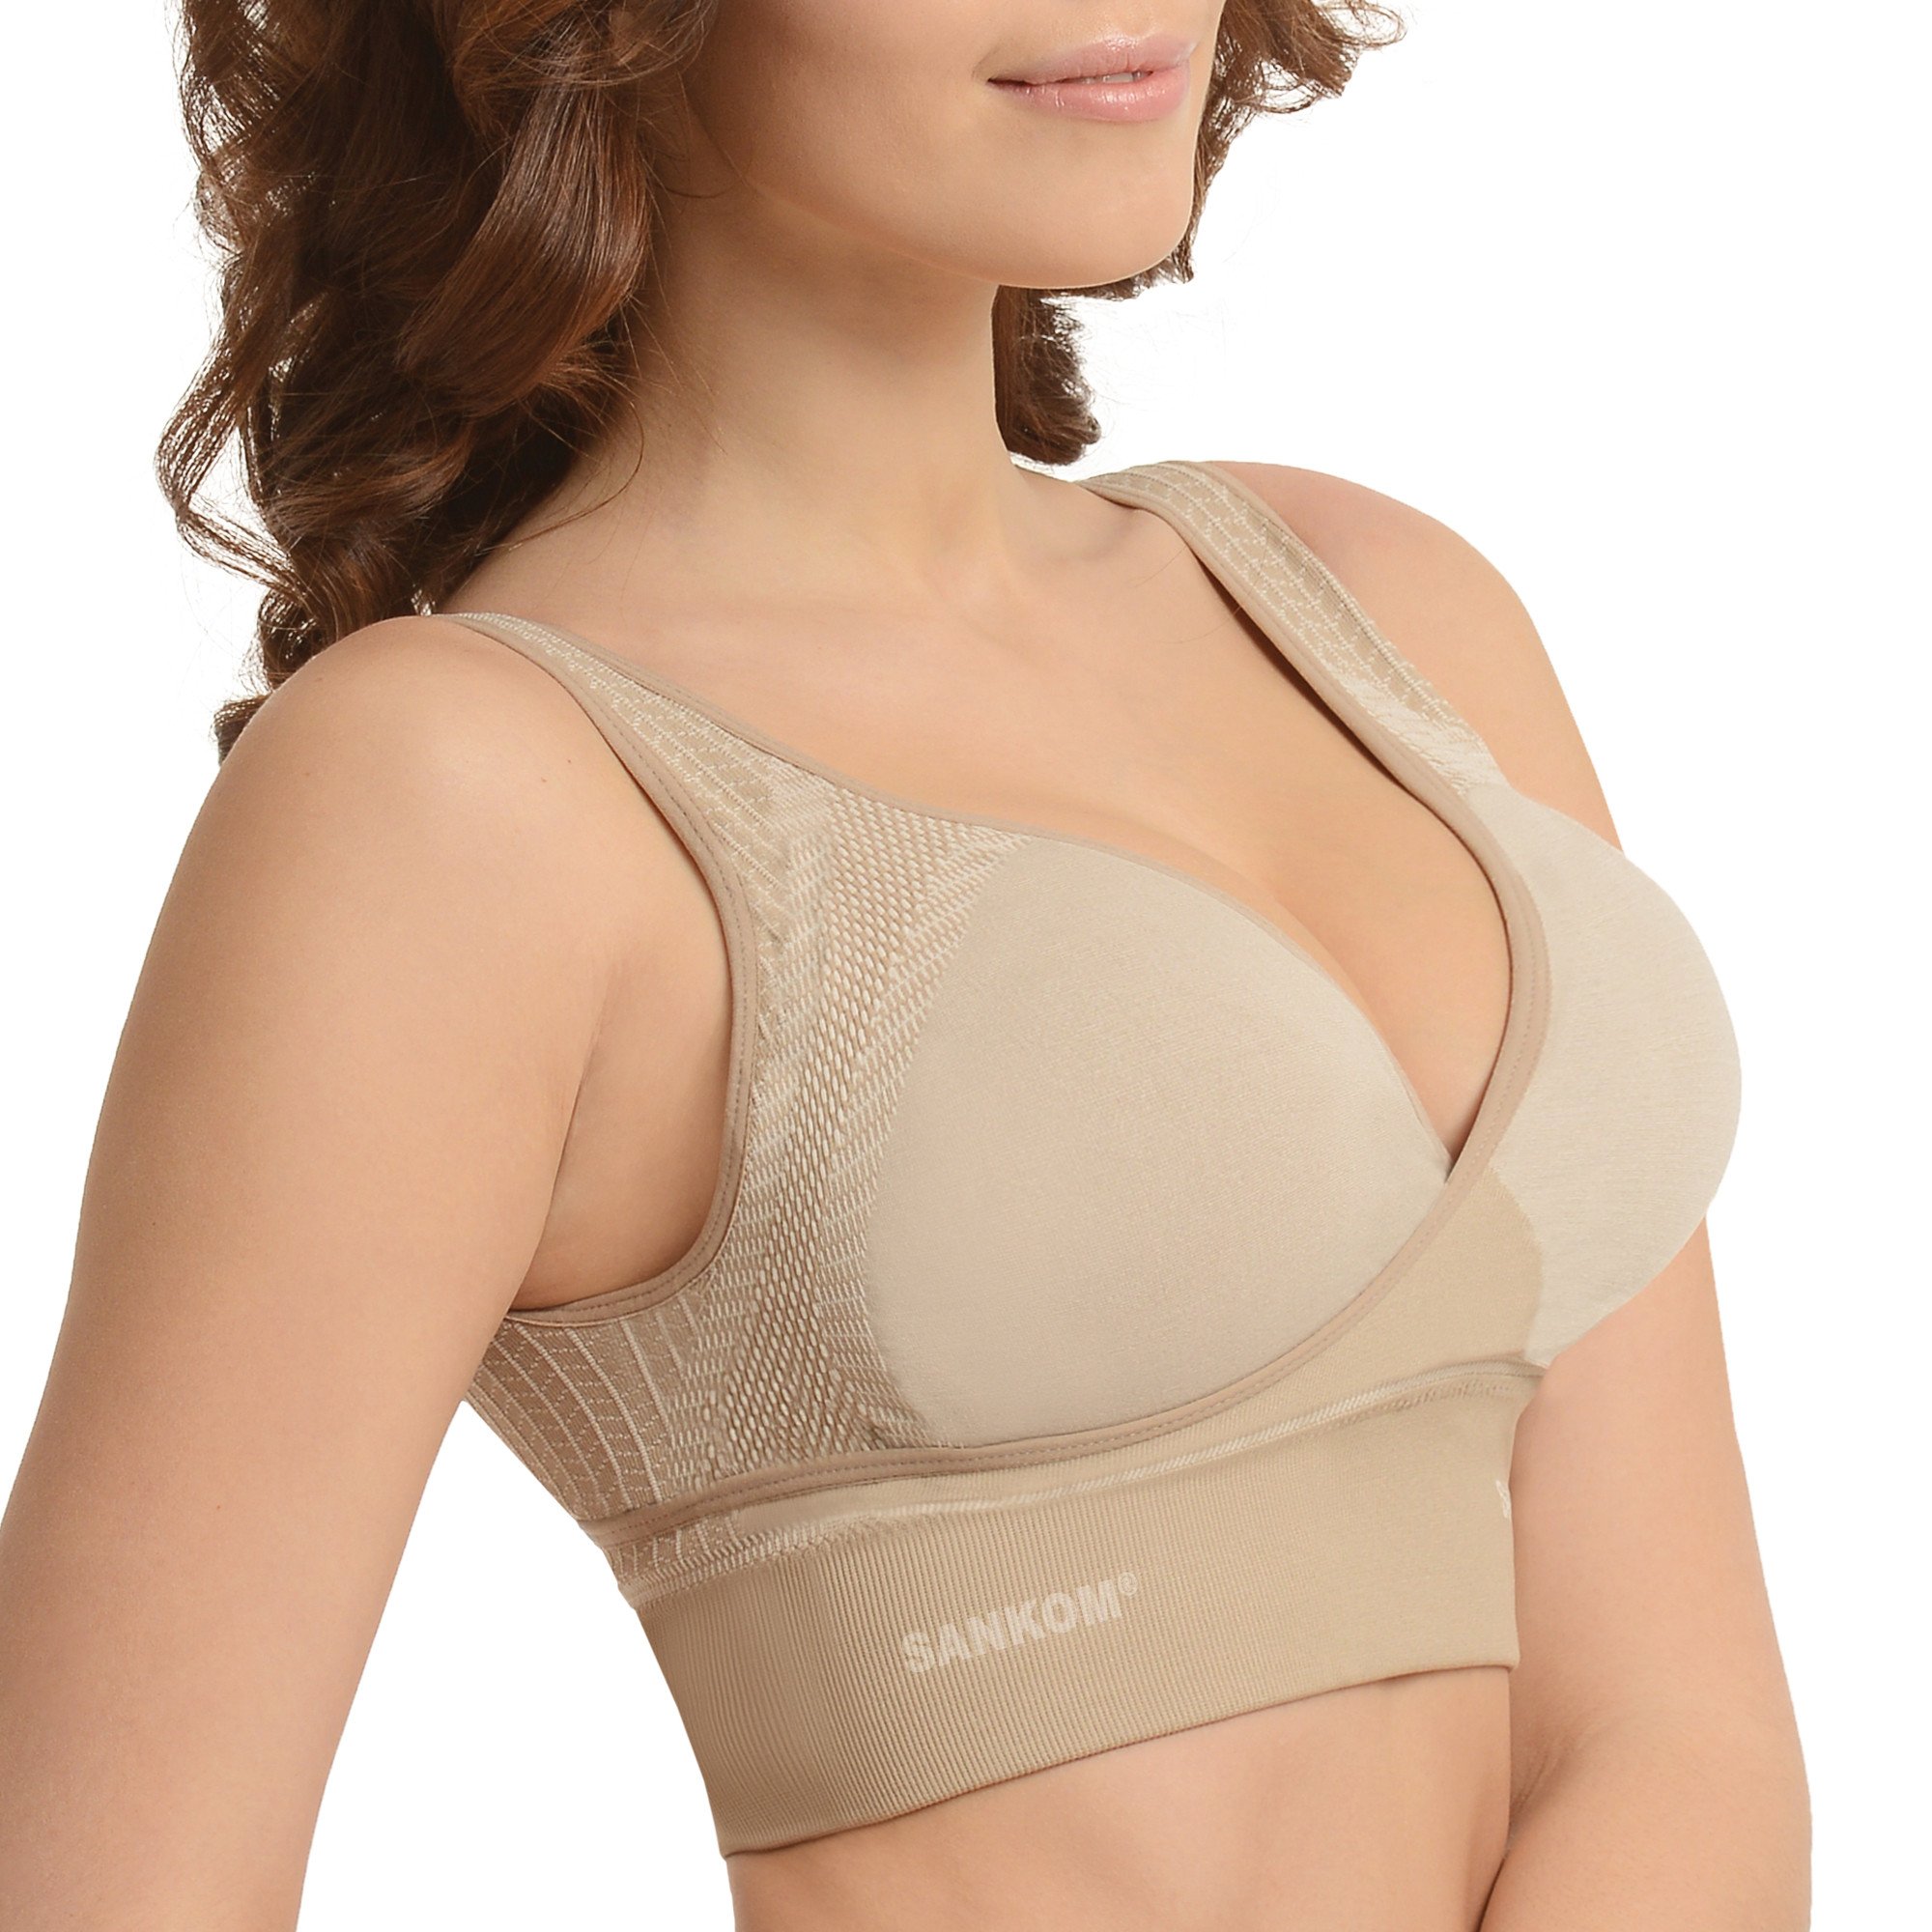 Shop LC SANKOM Patented Set of 2 Classic Shaping Camisole Body Shaper  Posture Corrector Shapewear with Lace Bra Black Beige M/L Birthday Gifts